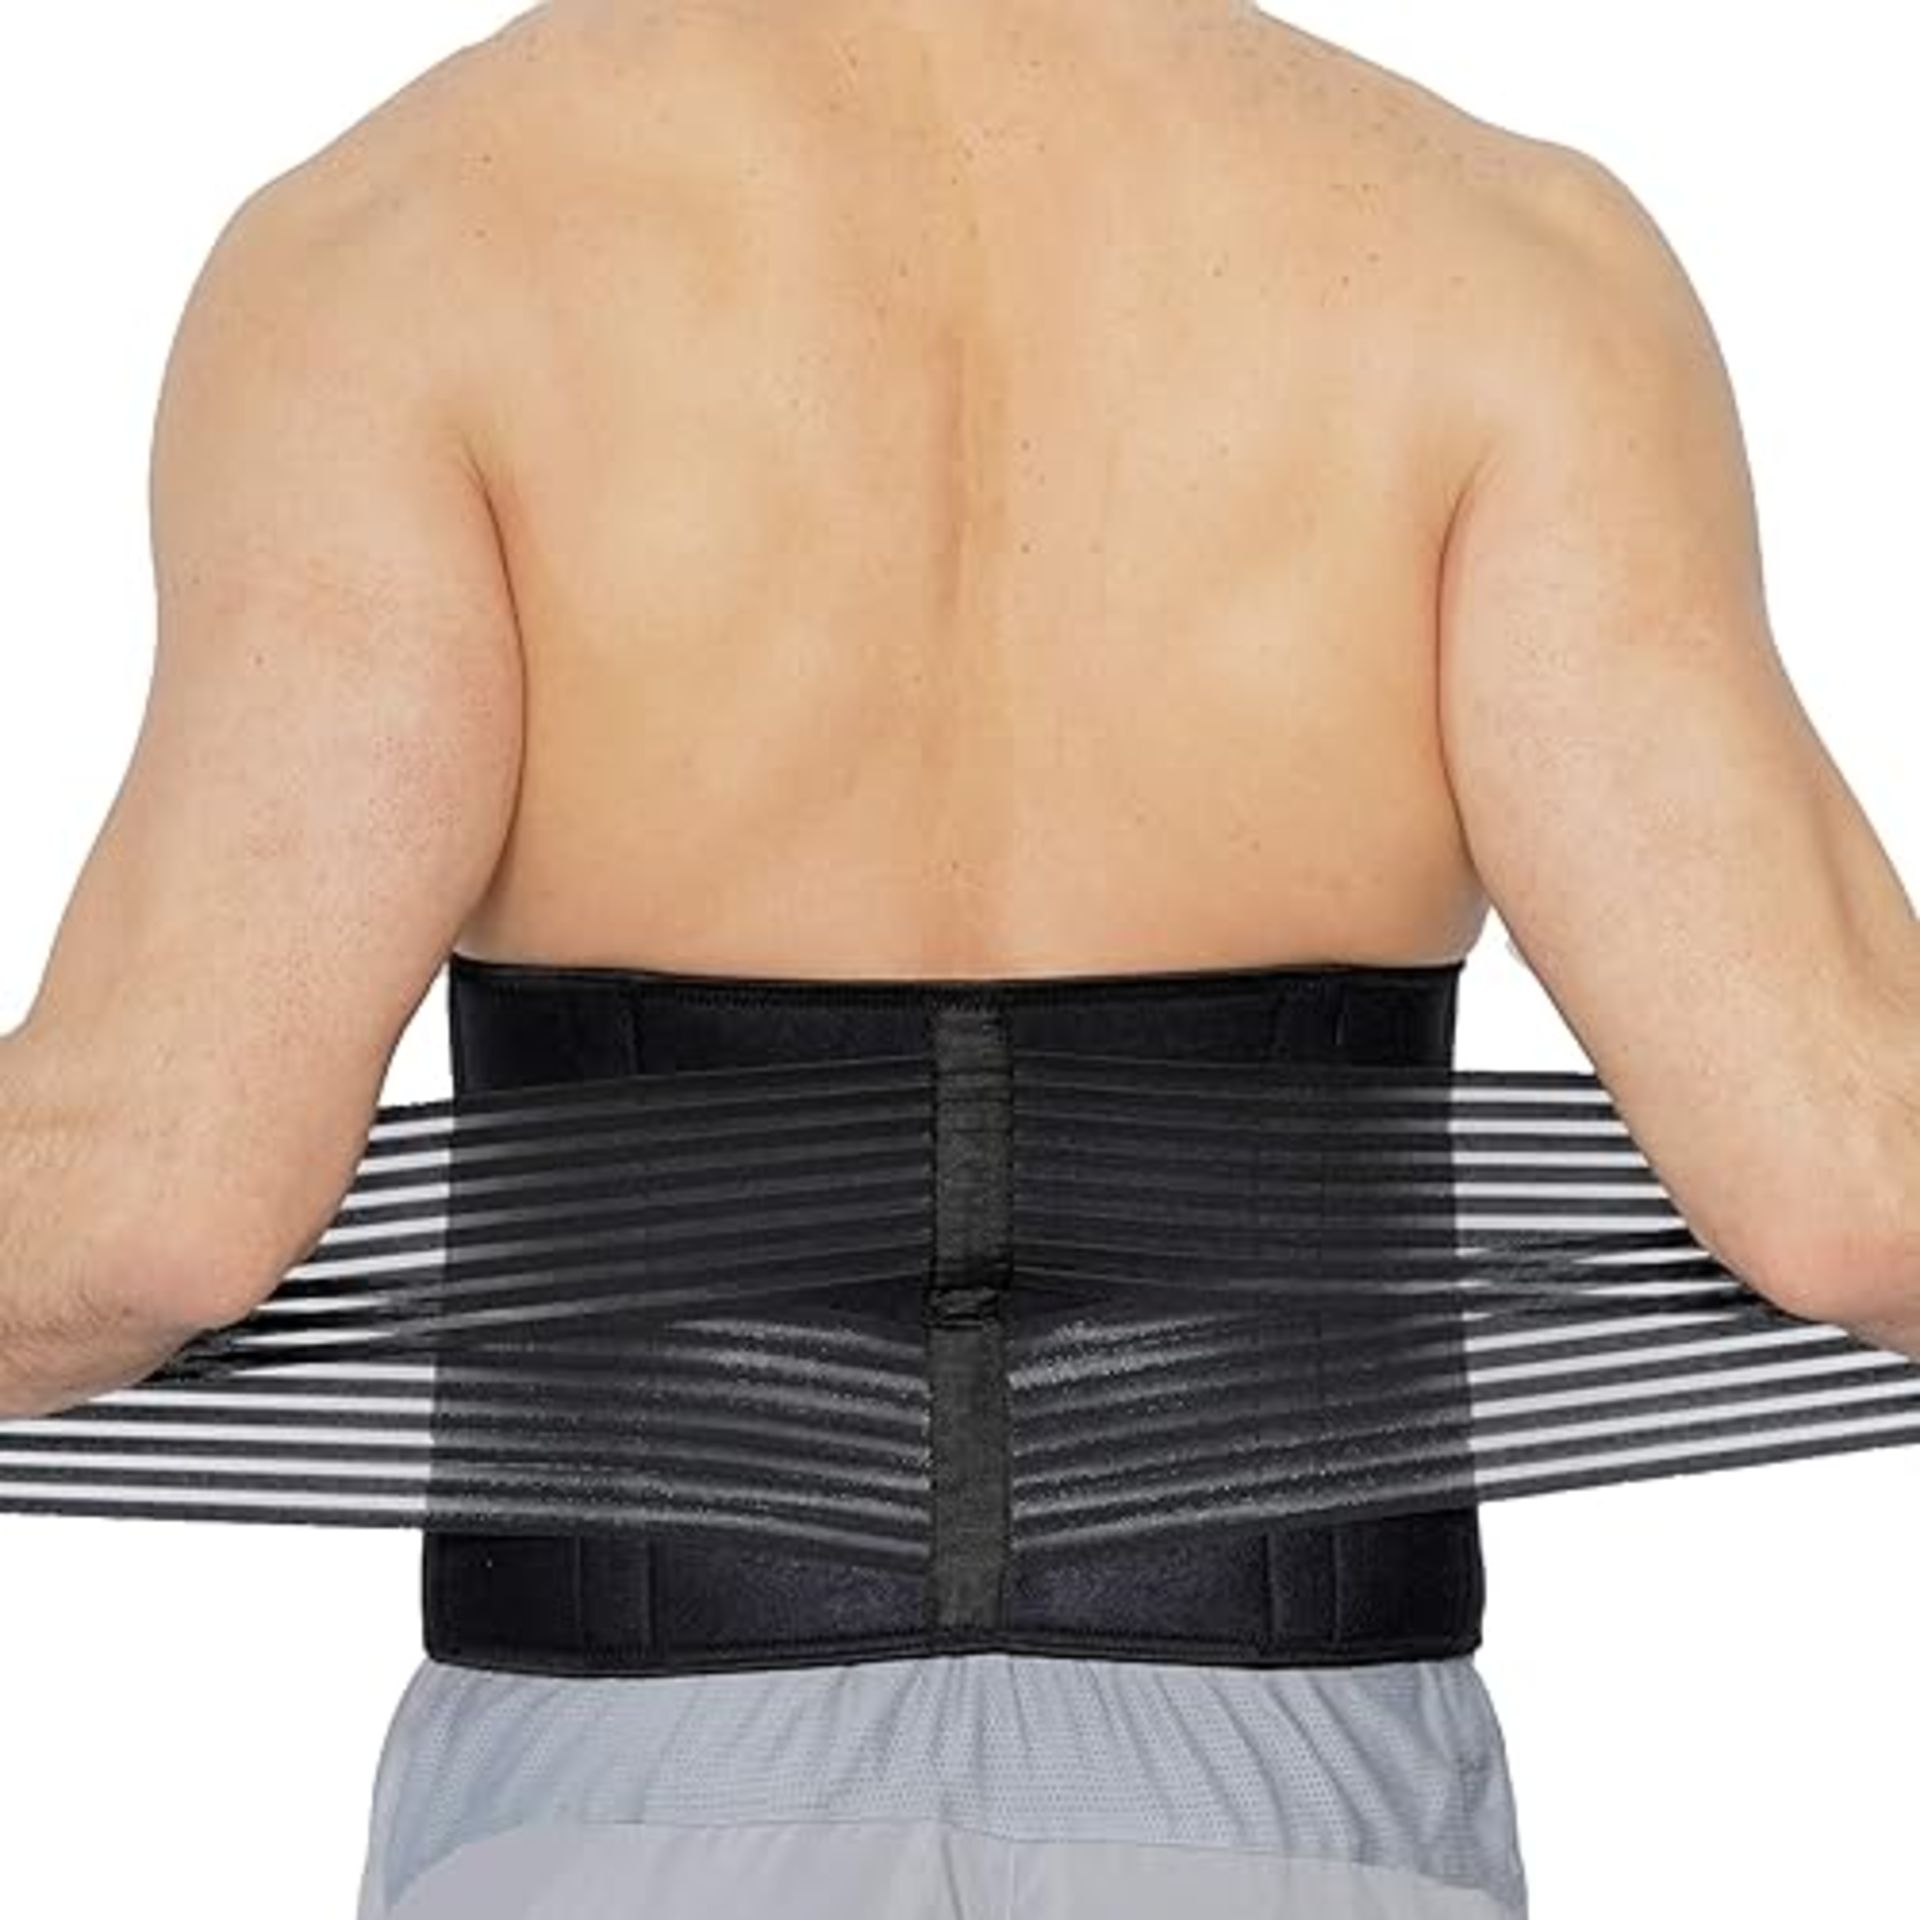 Neotech Care Neoprene Back Brace, Lumbar Support With Double Banded Strong Compression Pull Strap...